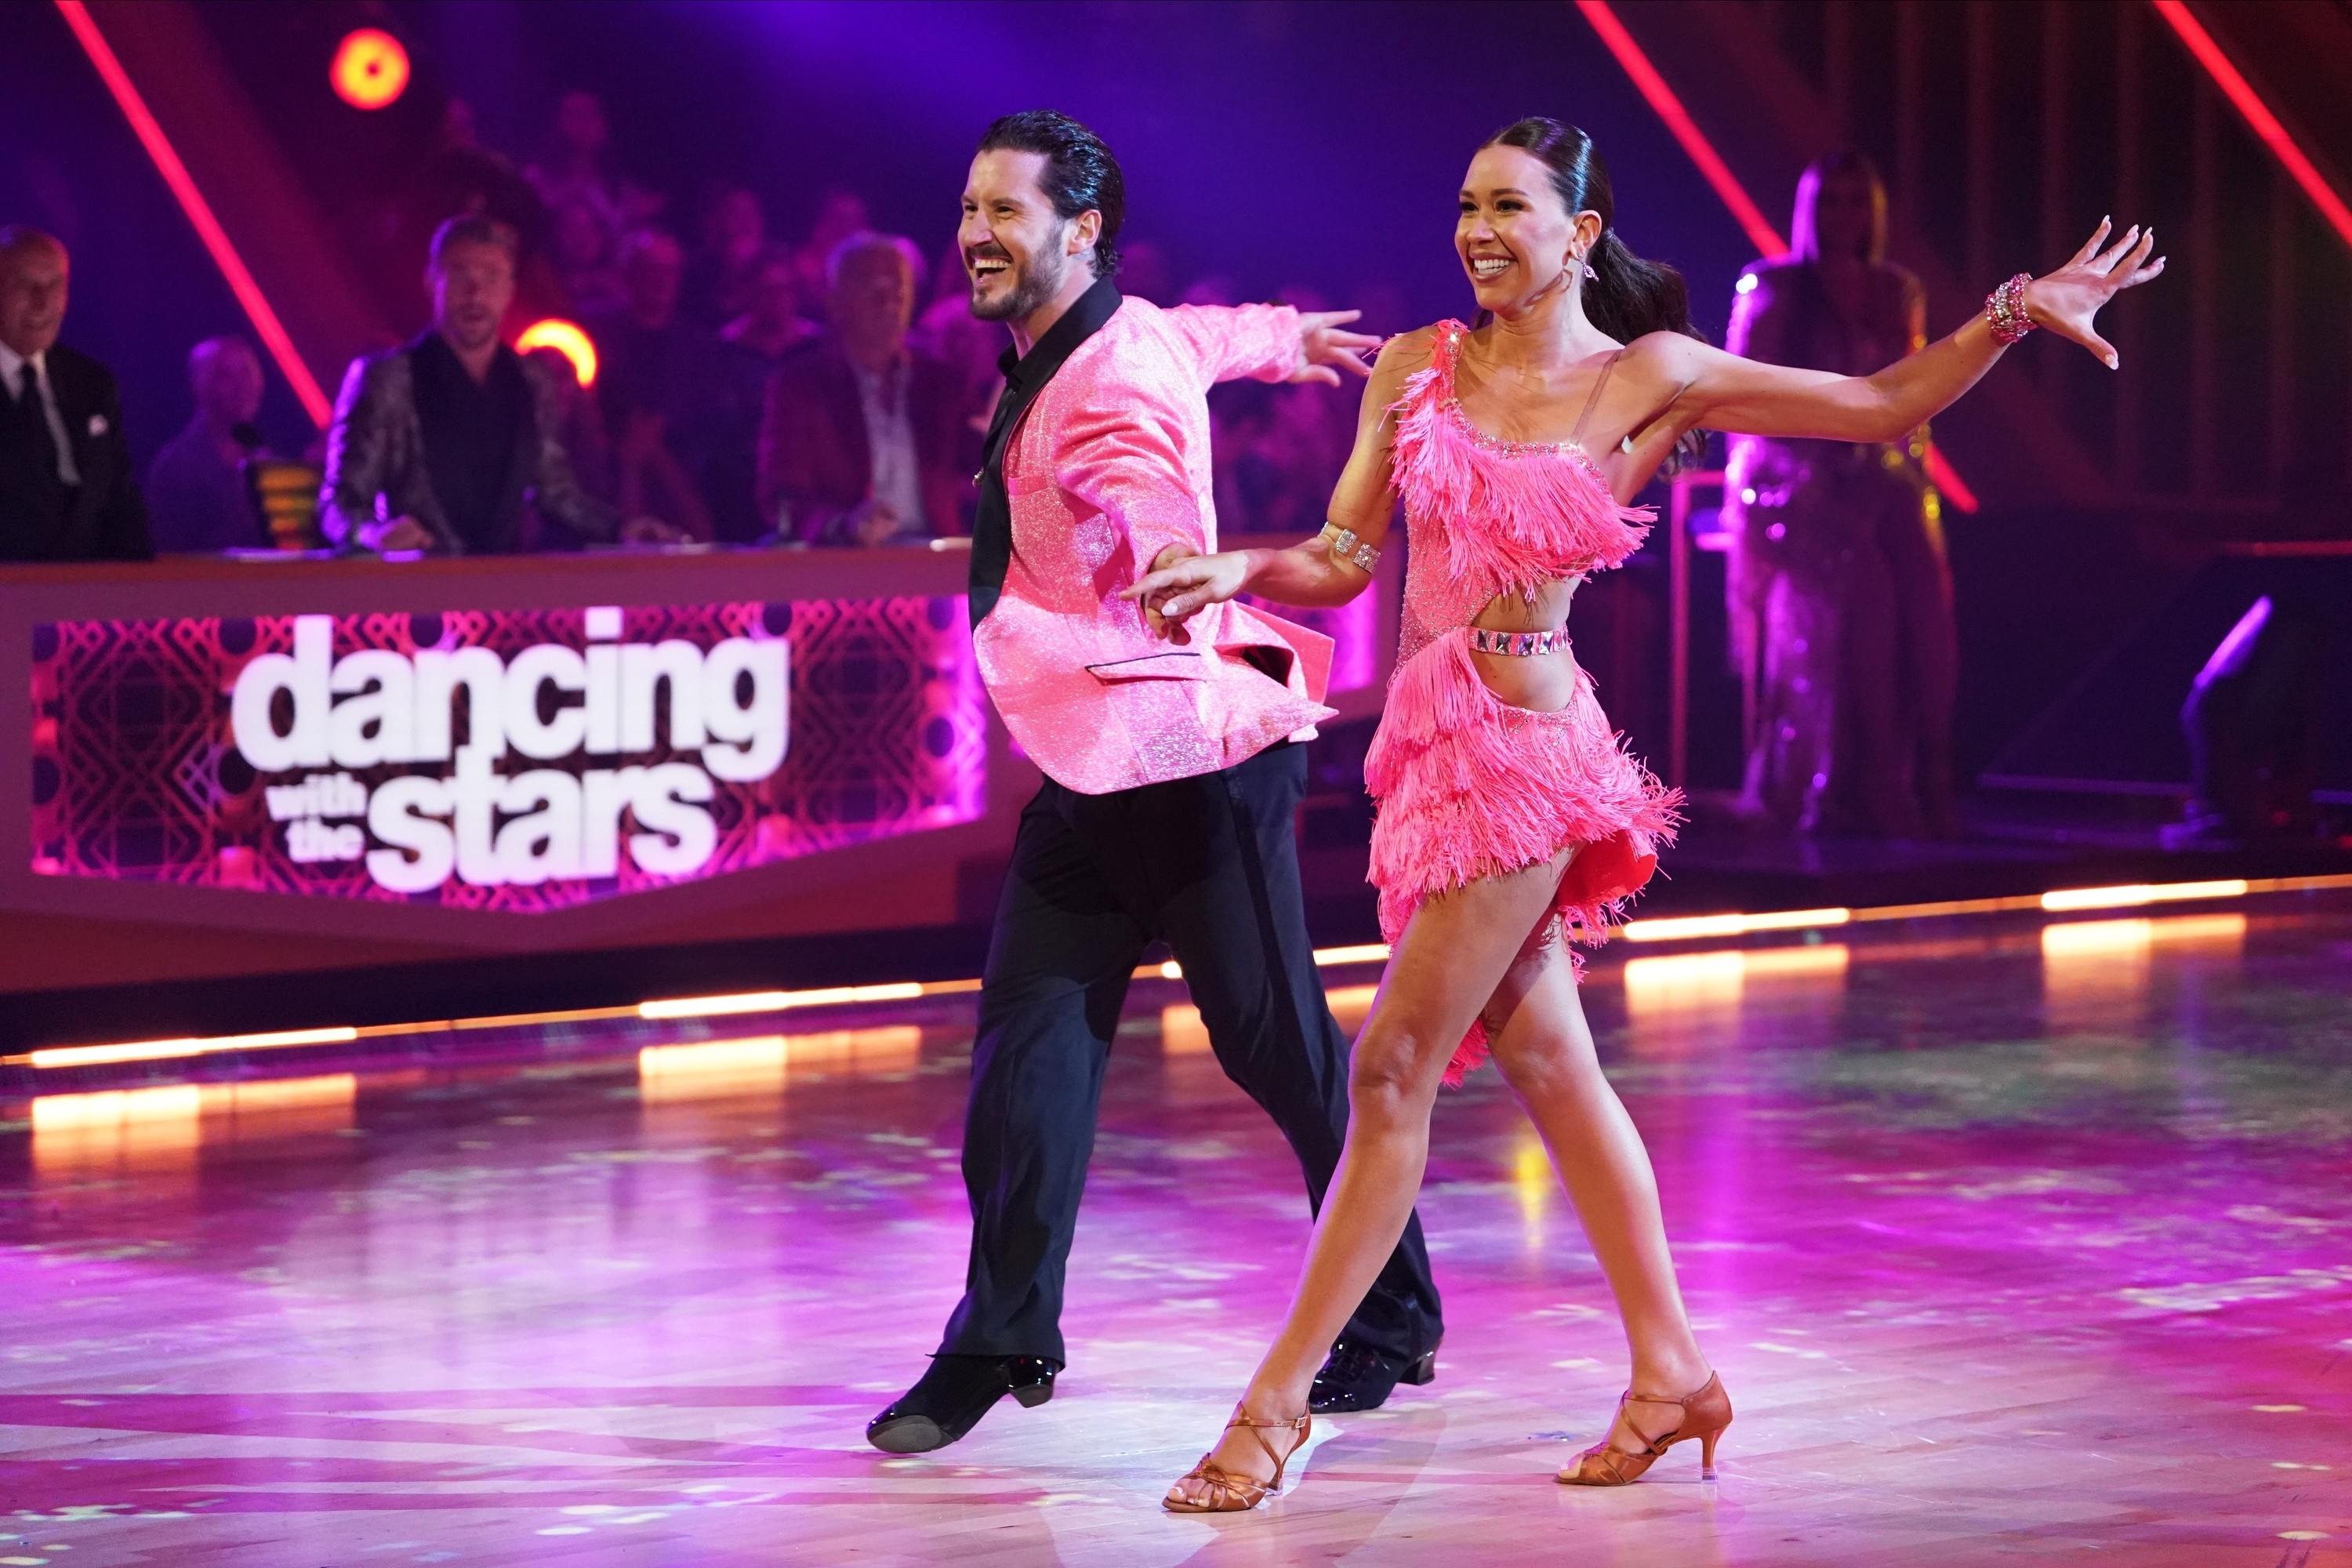 Two dancers perform on stage with smiles, man in a satin jacket and woman in a fringed outfit. The &quot;Dancing with the Stars&quot; logo is visible